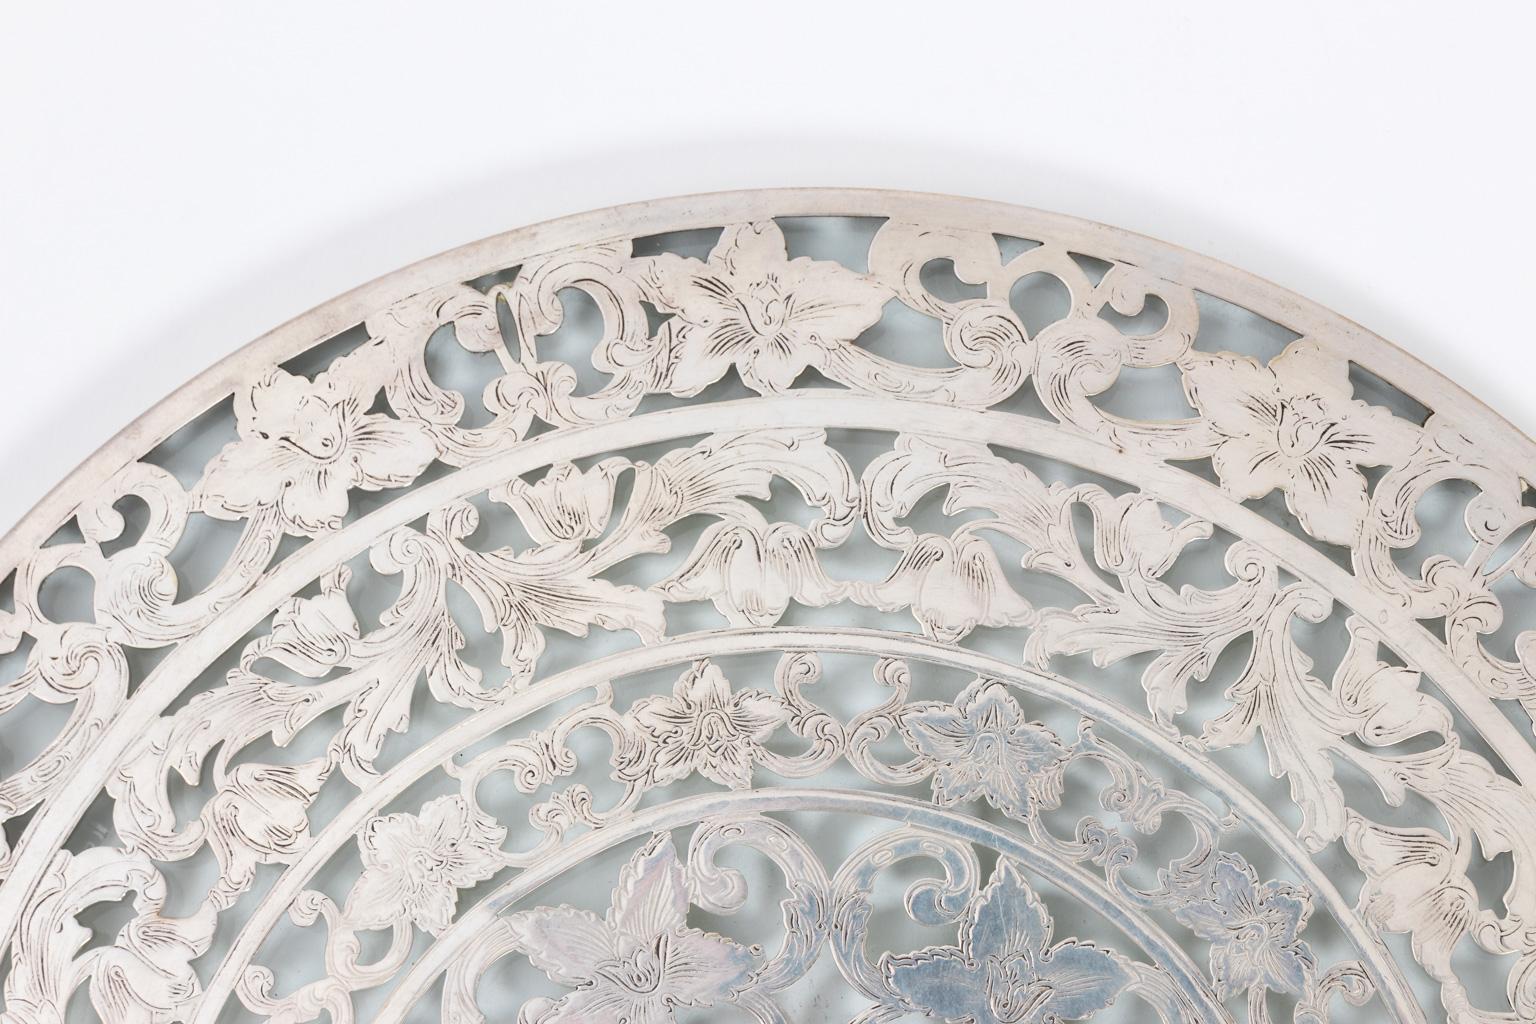 Early to mid-20th century trivet in 10 Inches diameter. The silver work is detailed with floral tracery and is marked sterling silver, Webster along with the Webster hallmark. It weighs 89.64 grams.